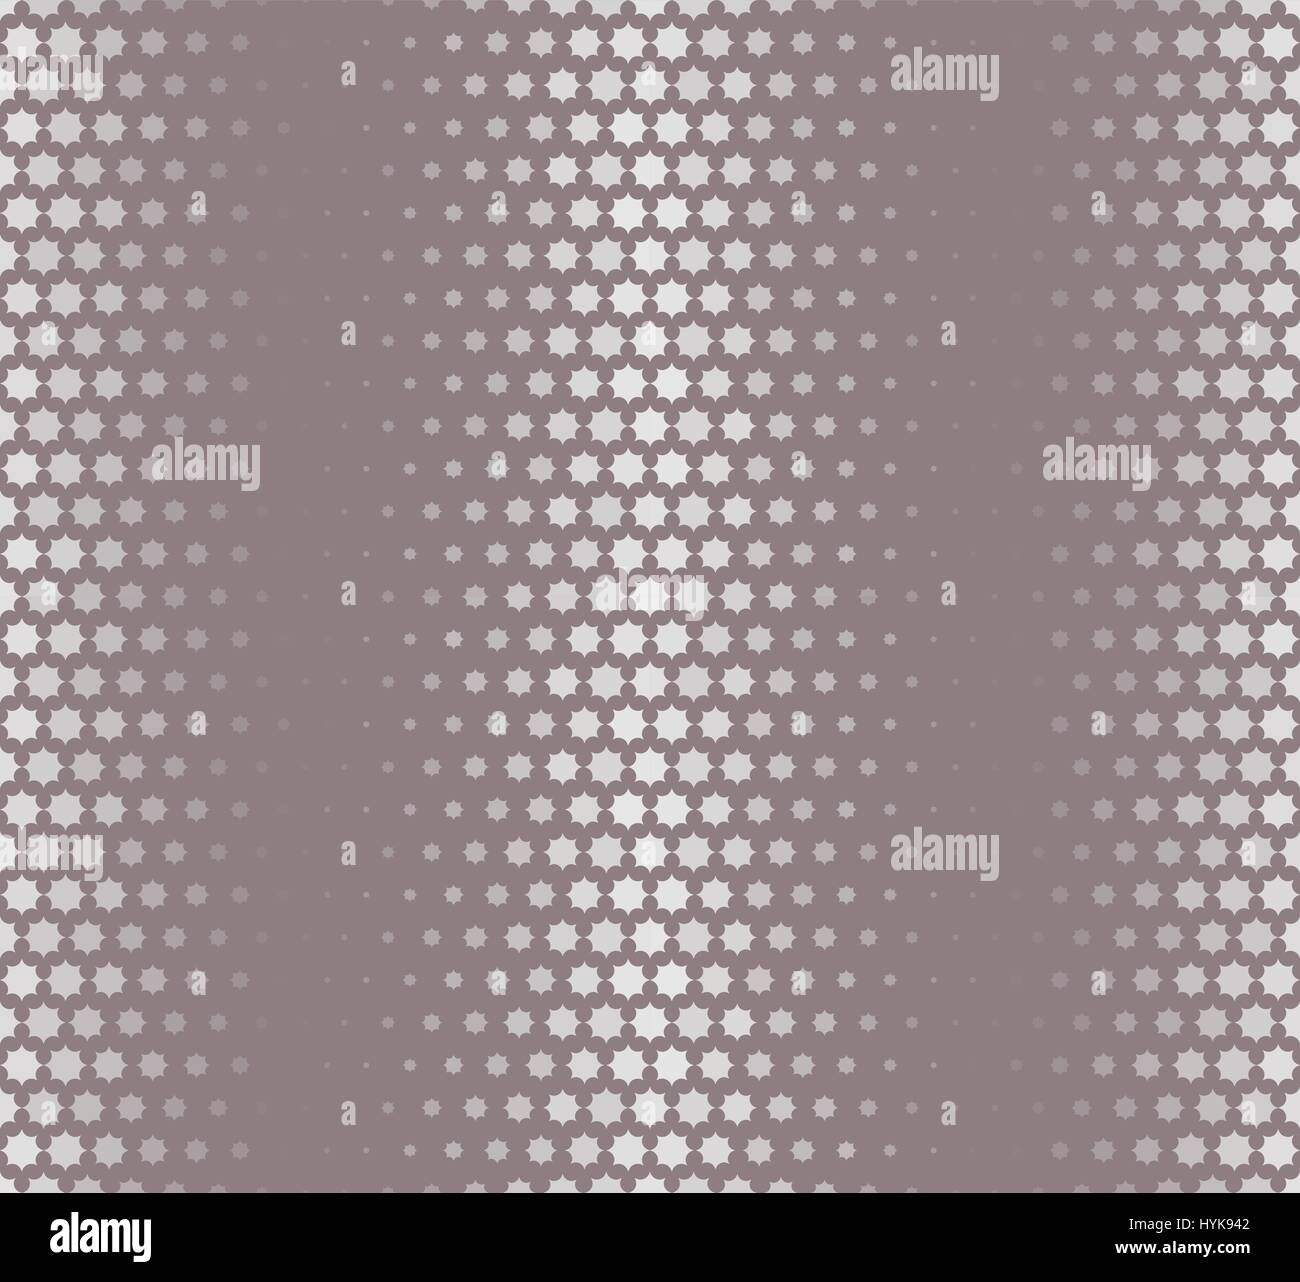 Isolated abstract grey color starlike pattern, seamless texture vector illustration Stock Vector